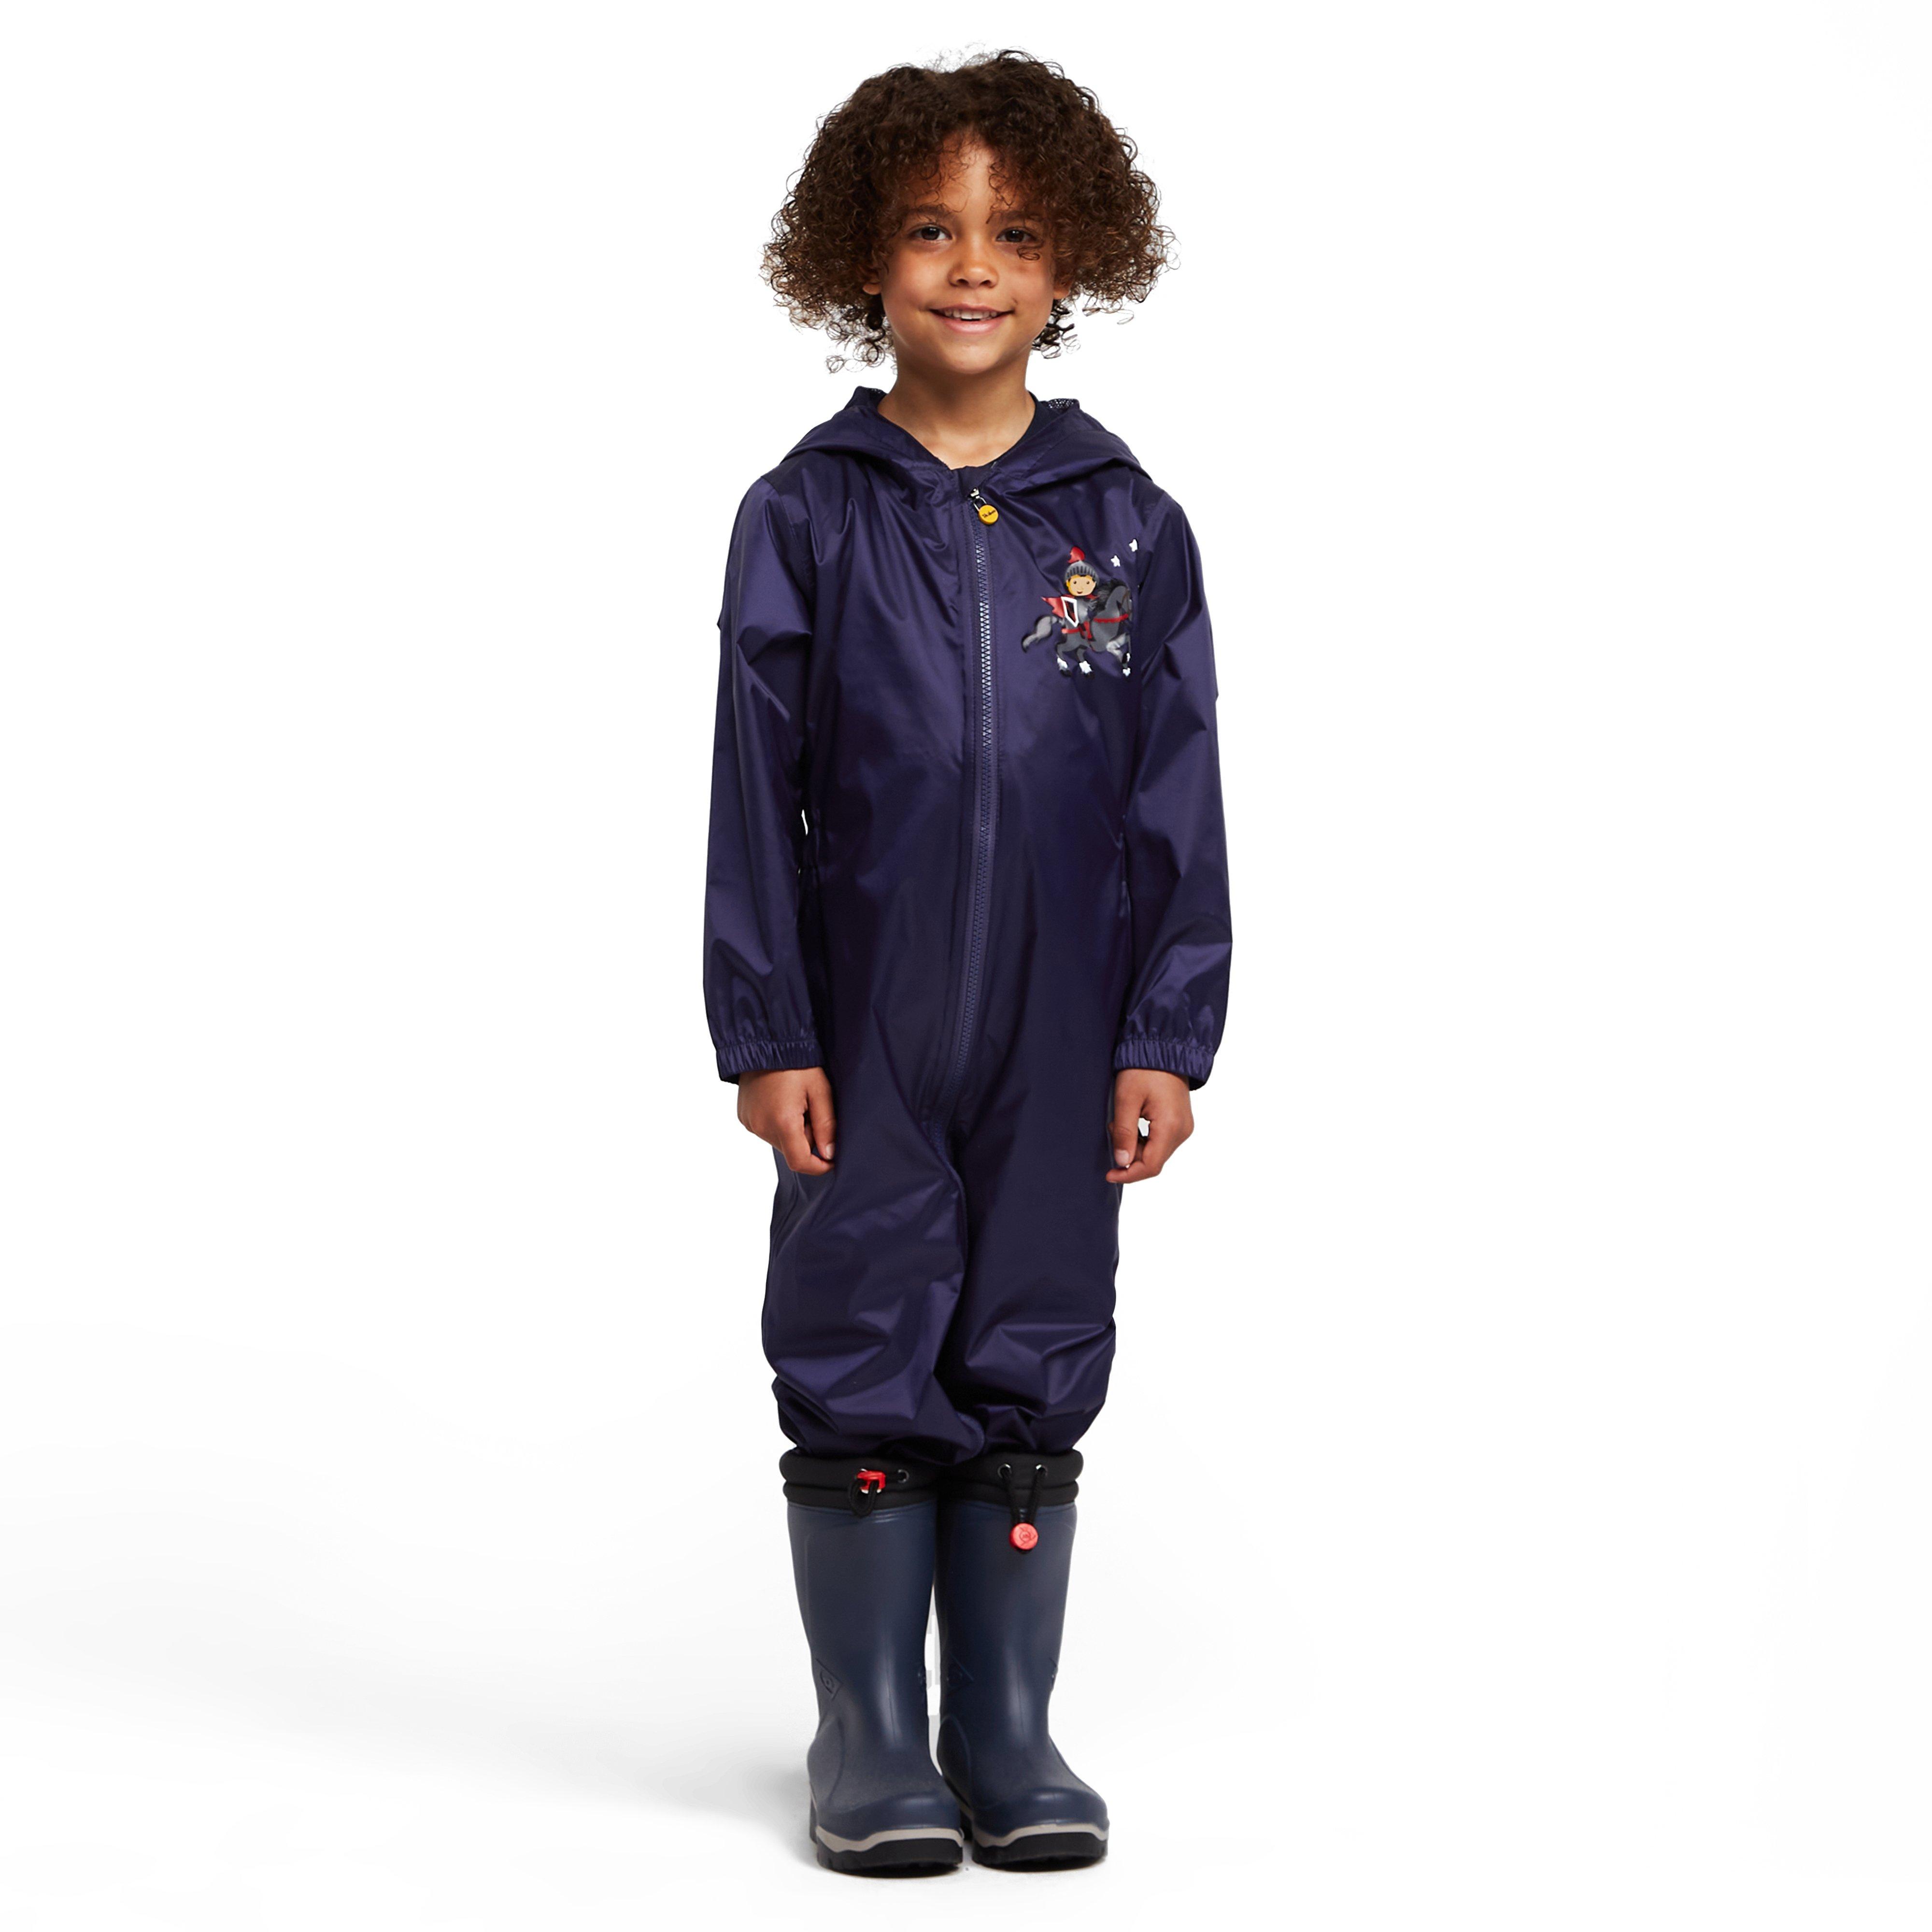 Tikaboo Childs Waterproof Suit Prince Charming